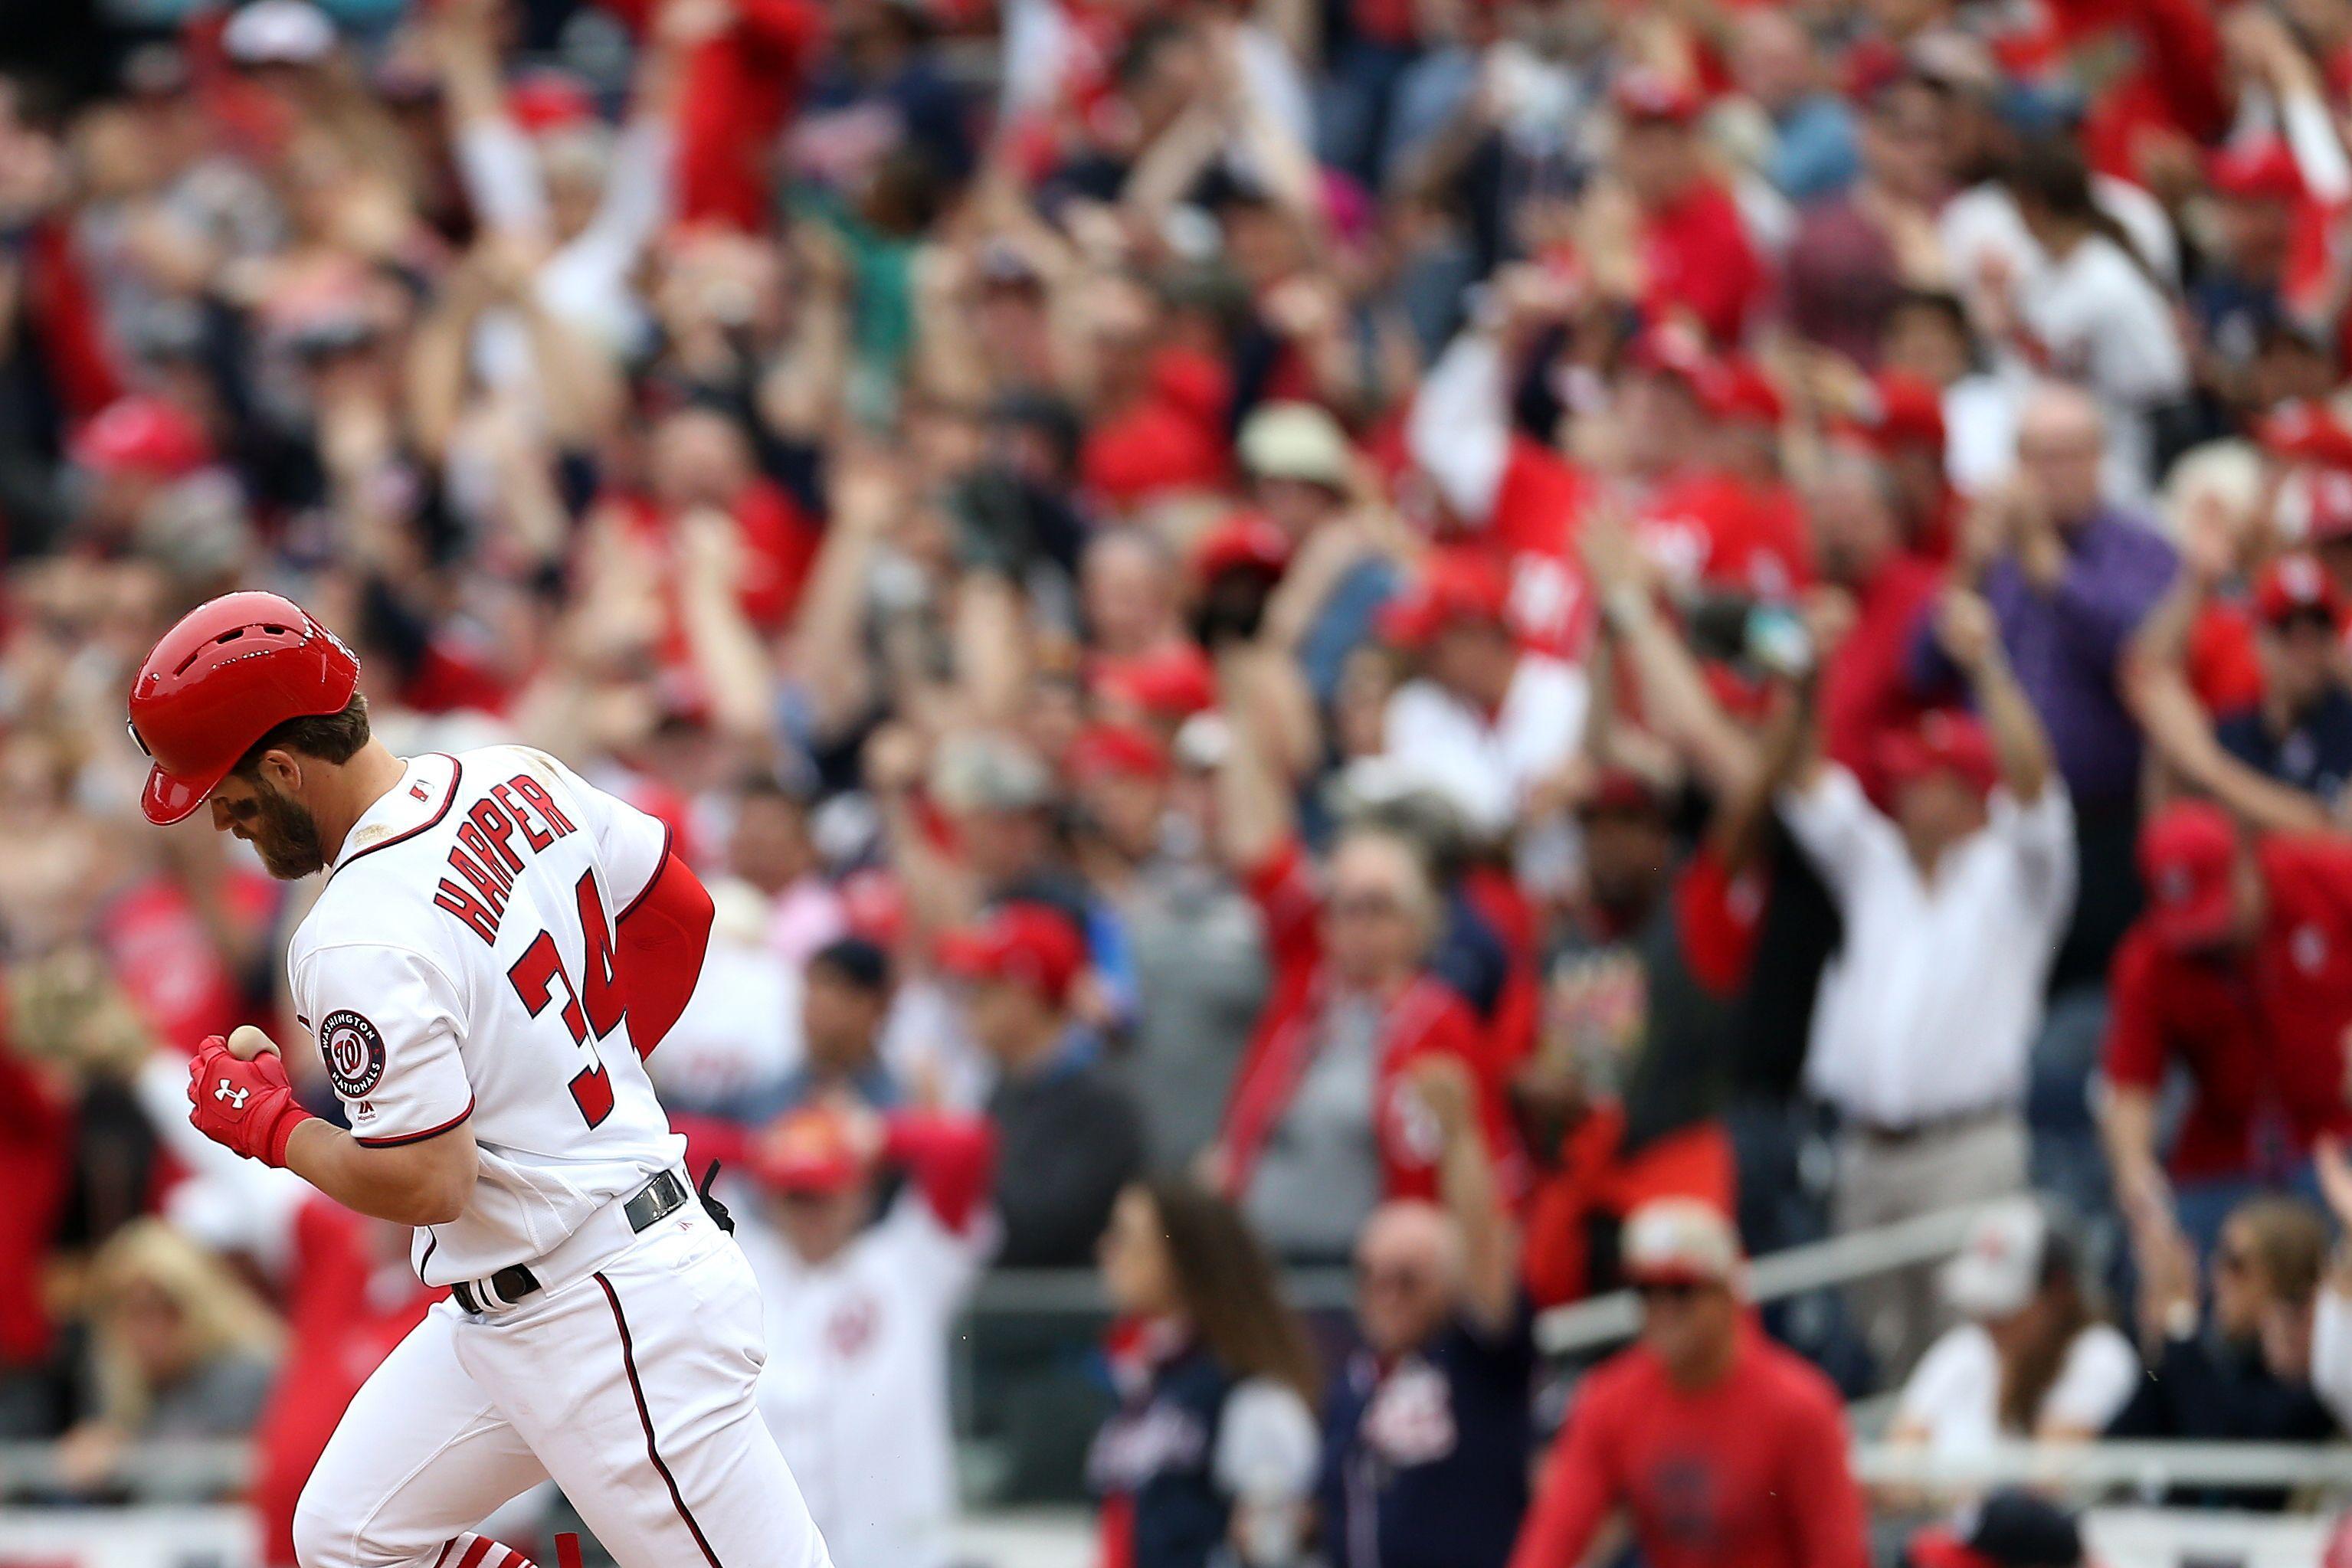 Bryce Harper's back. hitting bombs and doing what he can to help